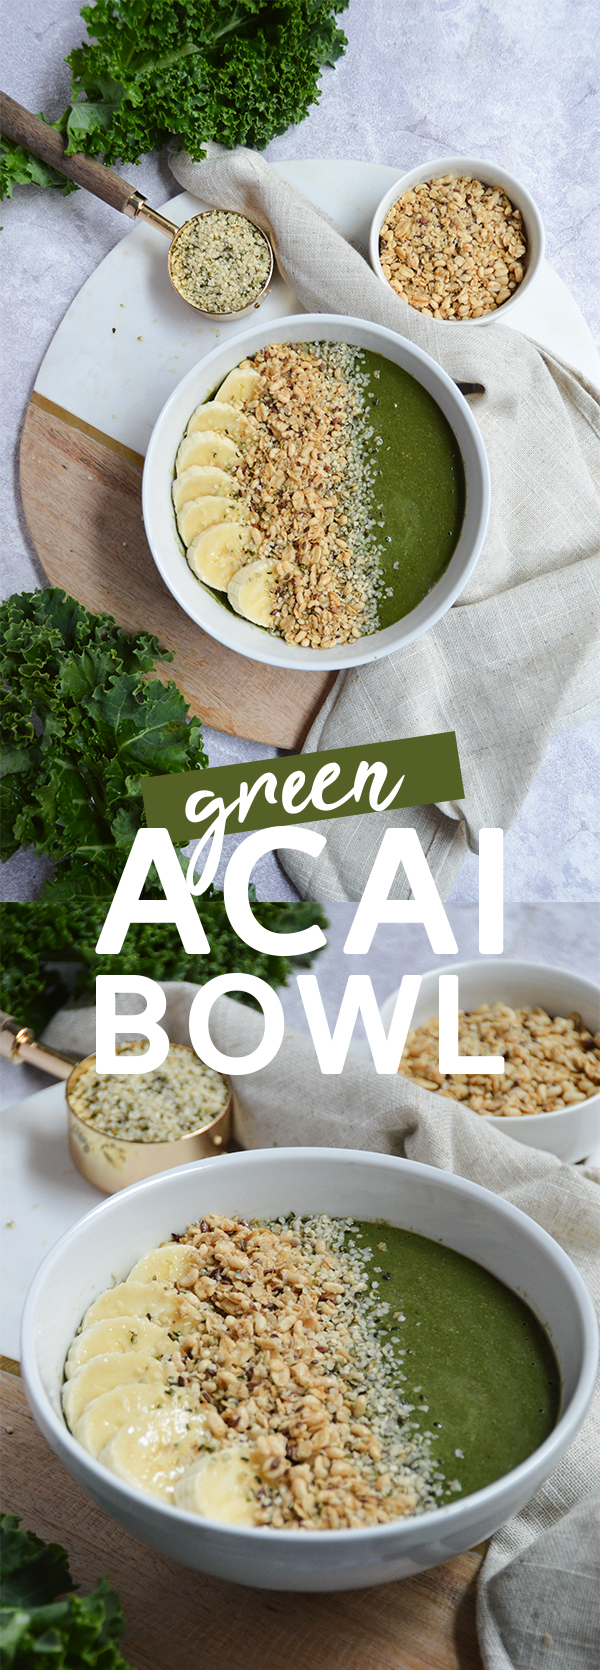 Kale & Spinach Acai Bowl - This green acai bowl is topped with granola and makes for the perfect breakfast! #vegan #plantbased #acaibowl #smoothiebowl #acai